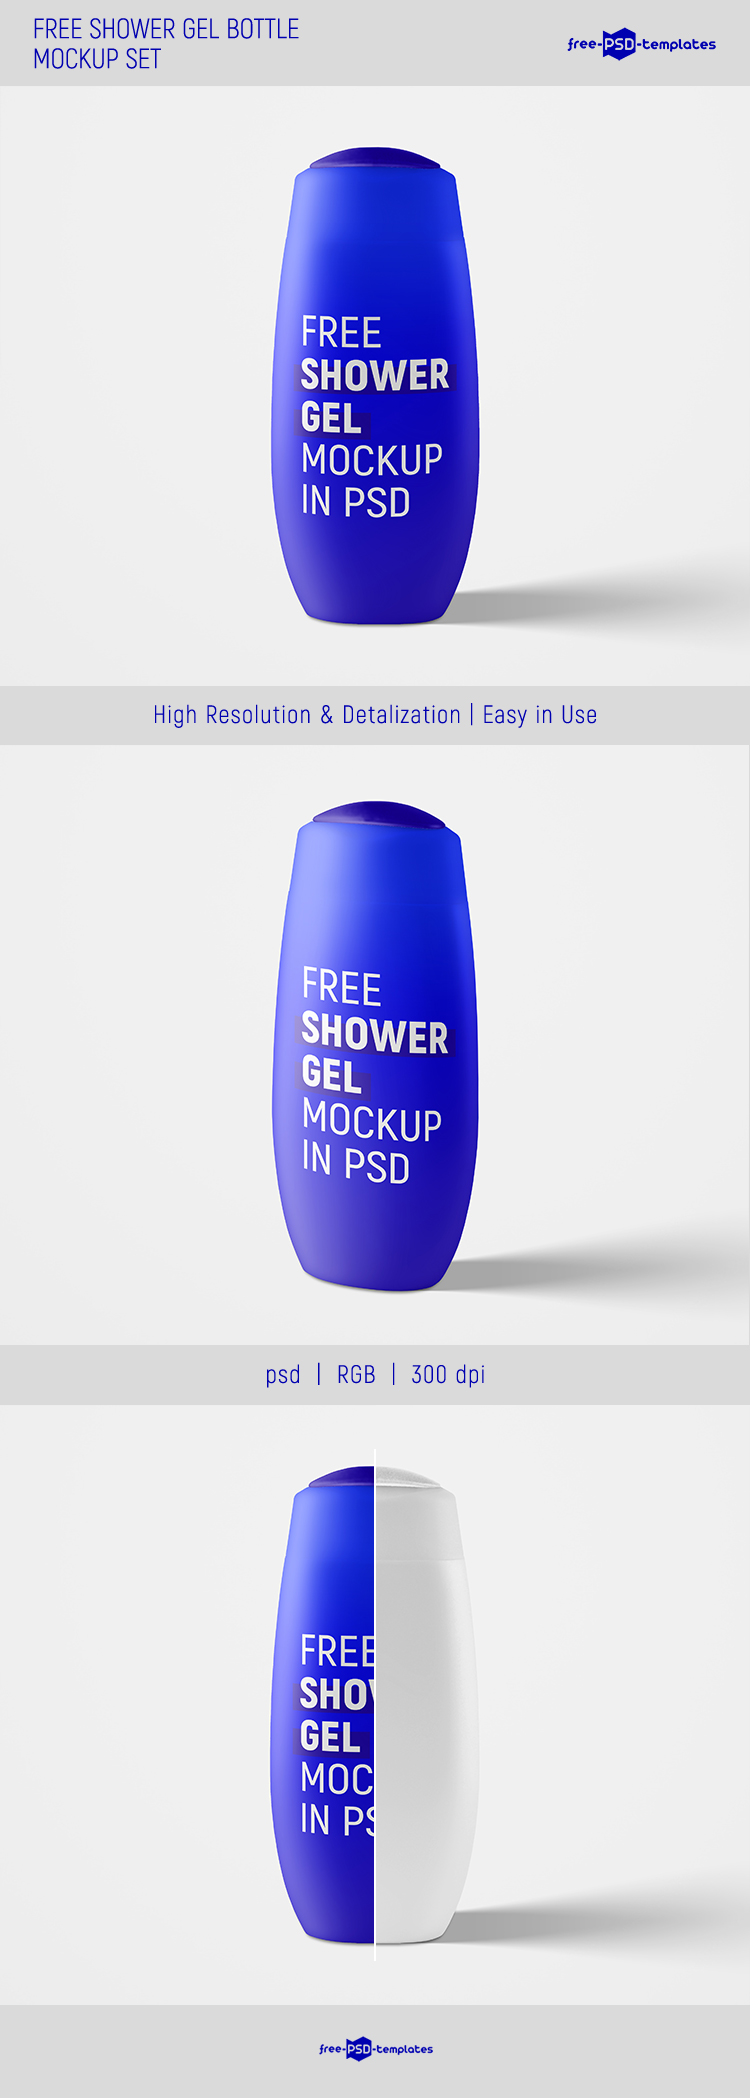 Download Yellowimages Mockups Clear Shower Gel Scrub Bottle Psd Mockup Psd PSD Mockup Templates